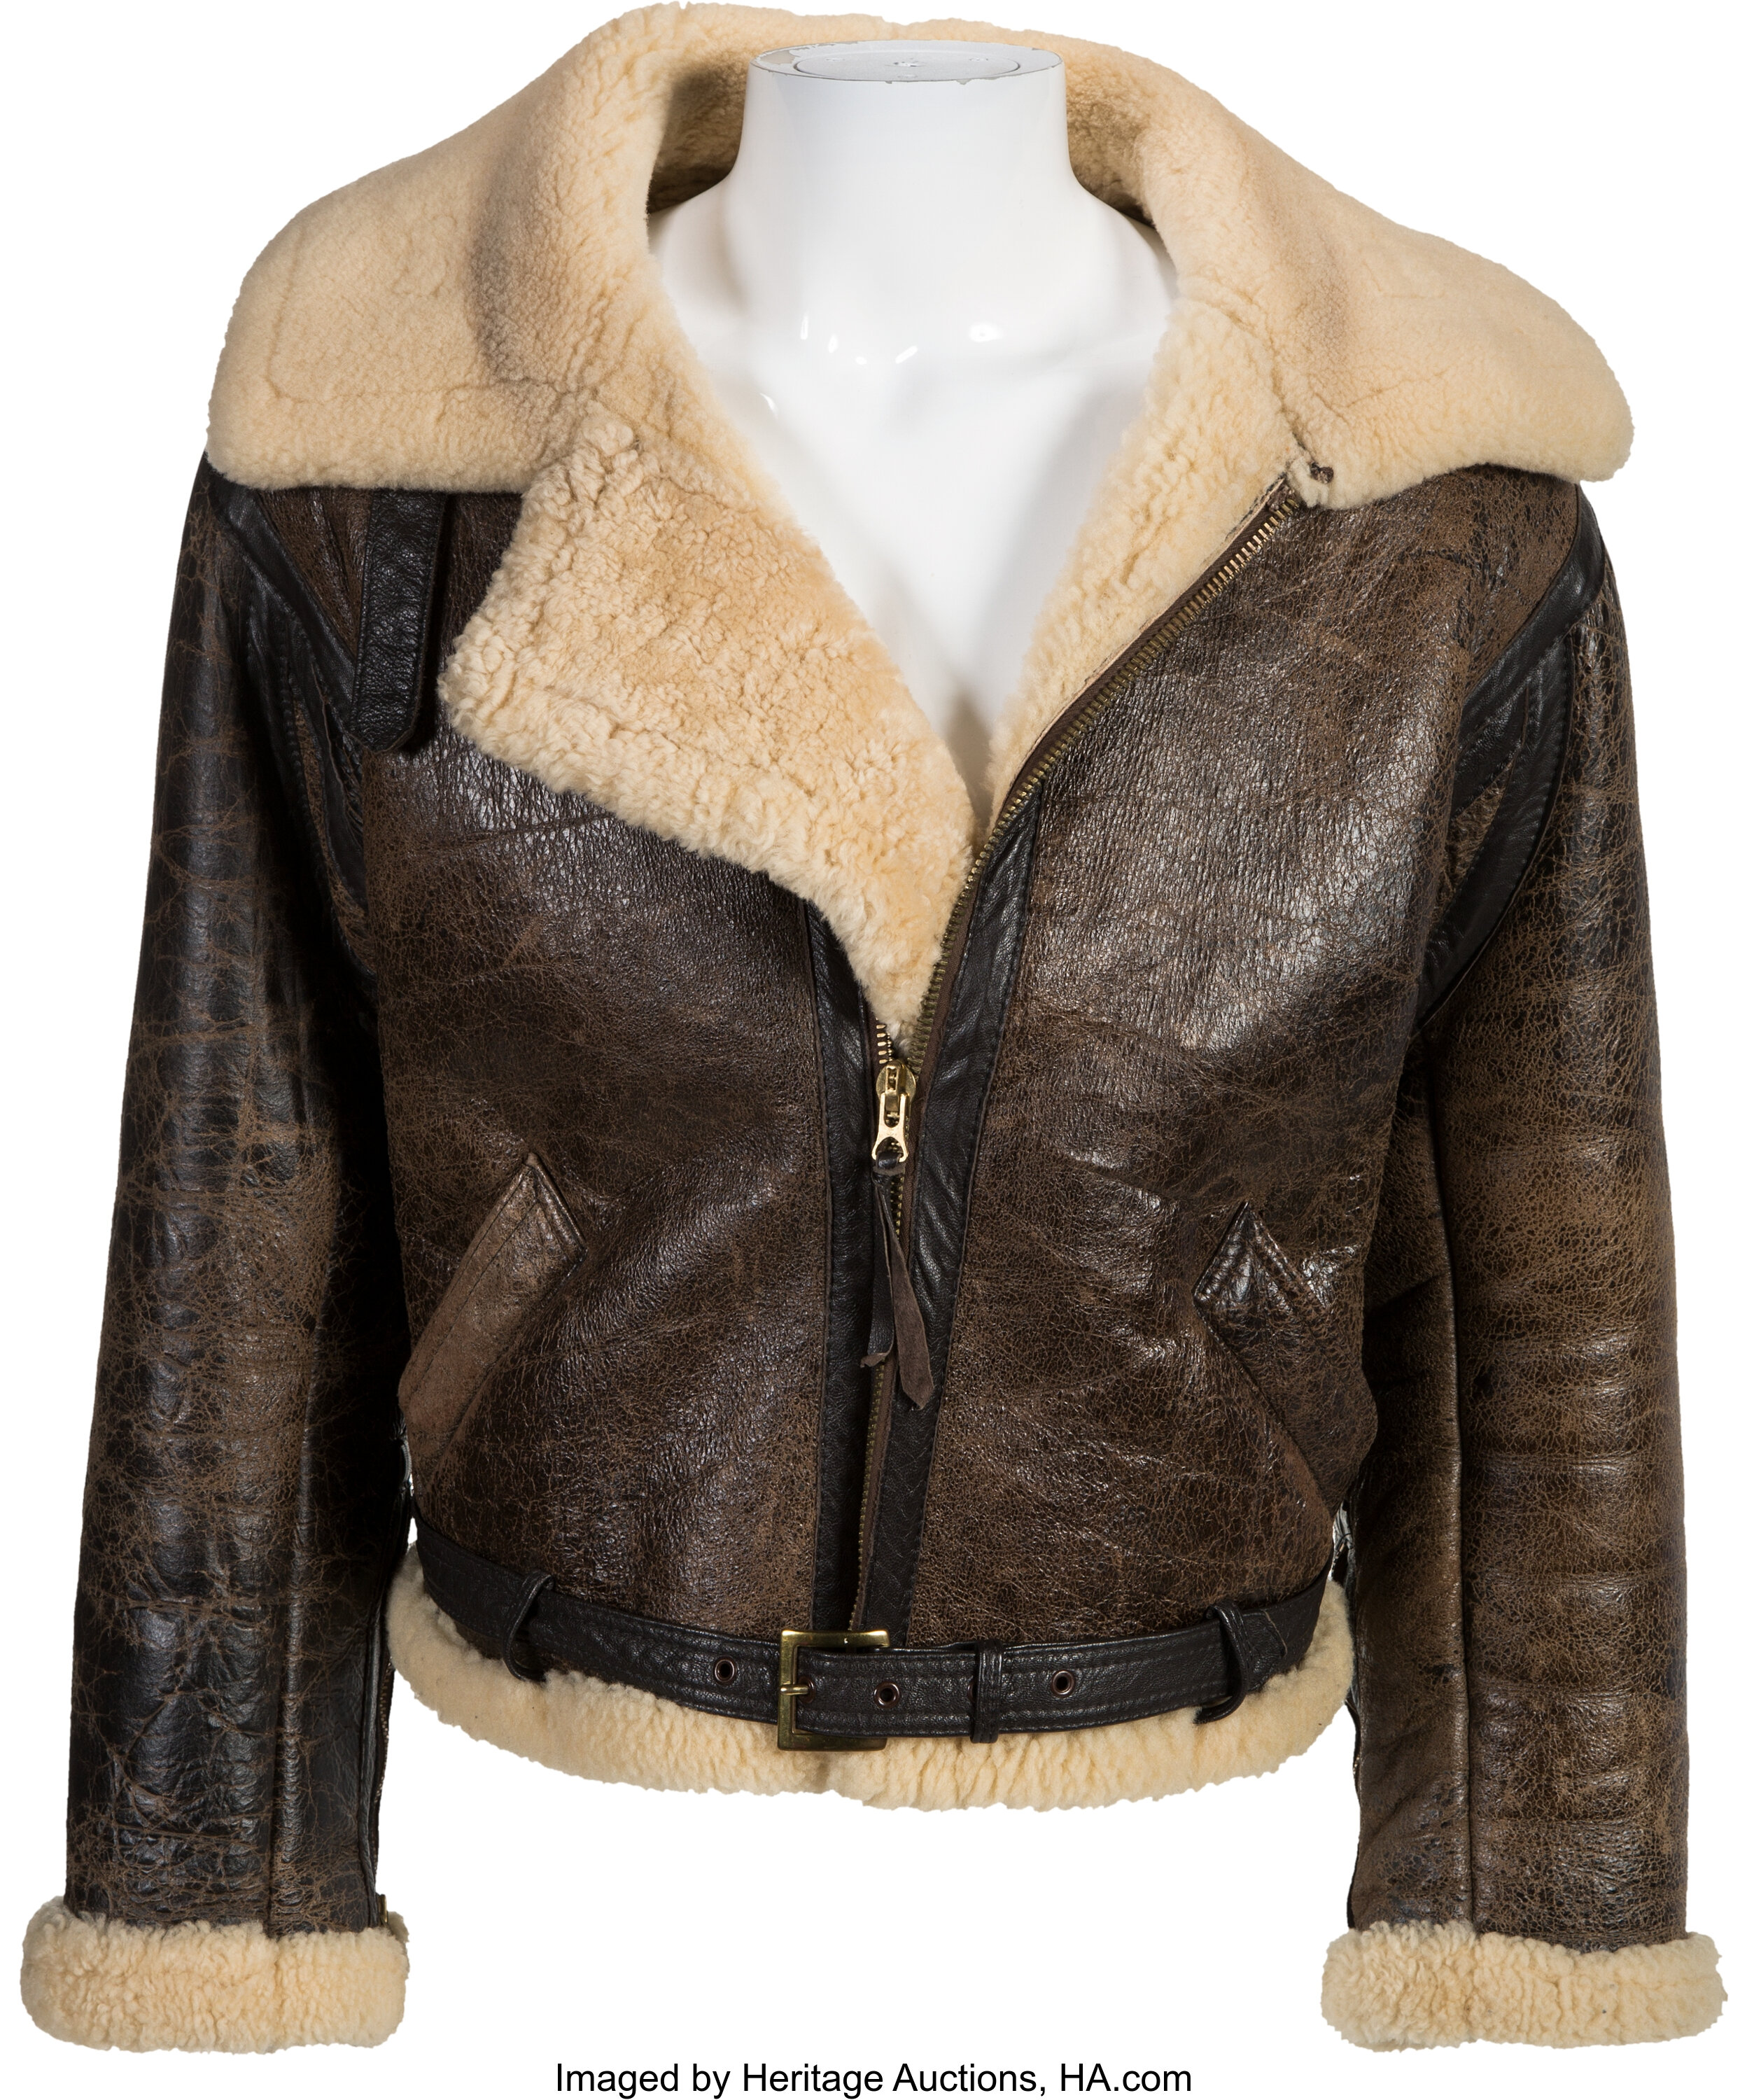 A Shearling Jacket from 